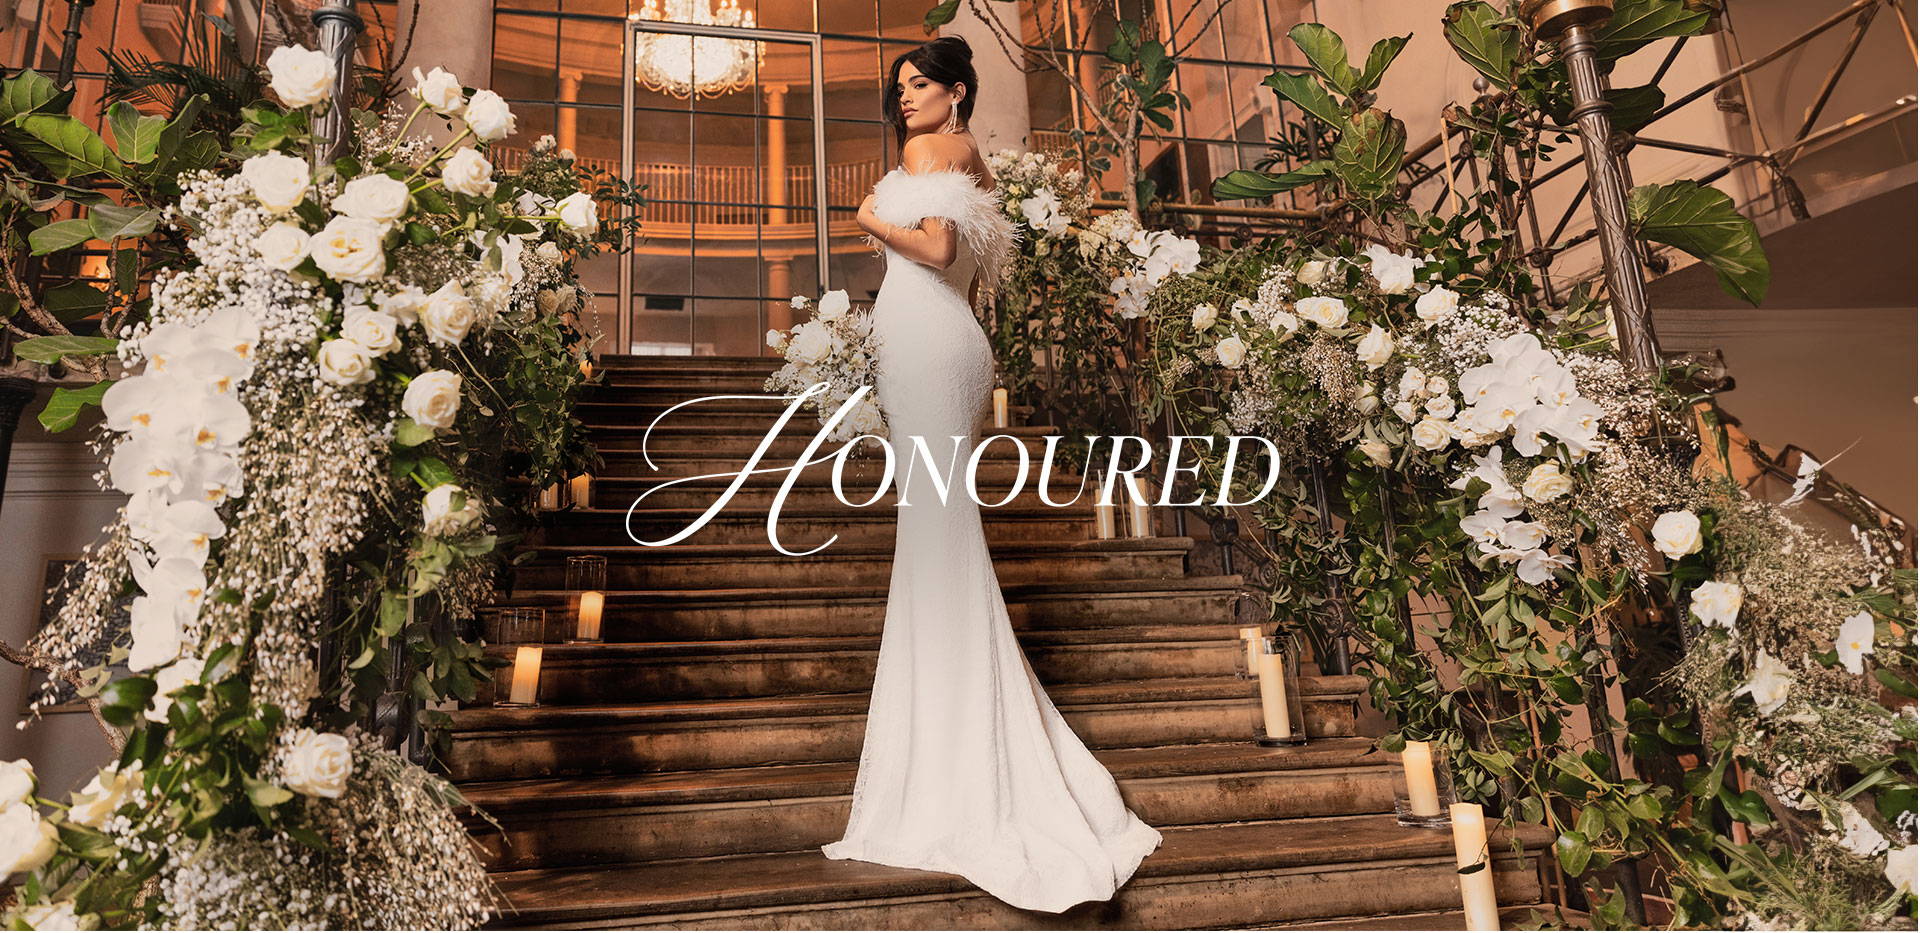 In The Moment bridal collection